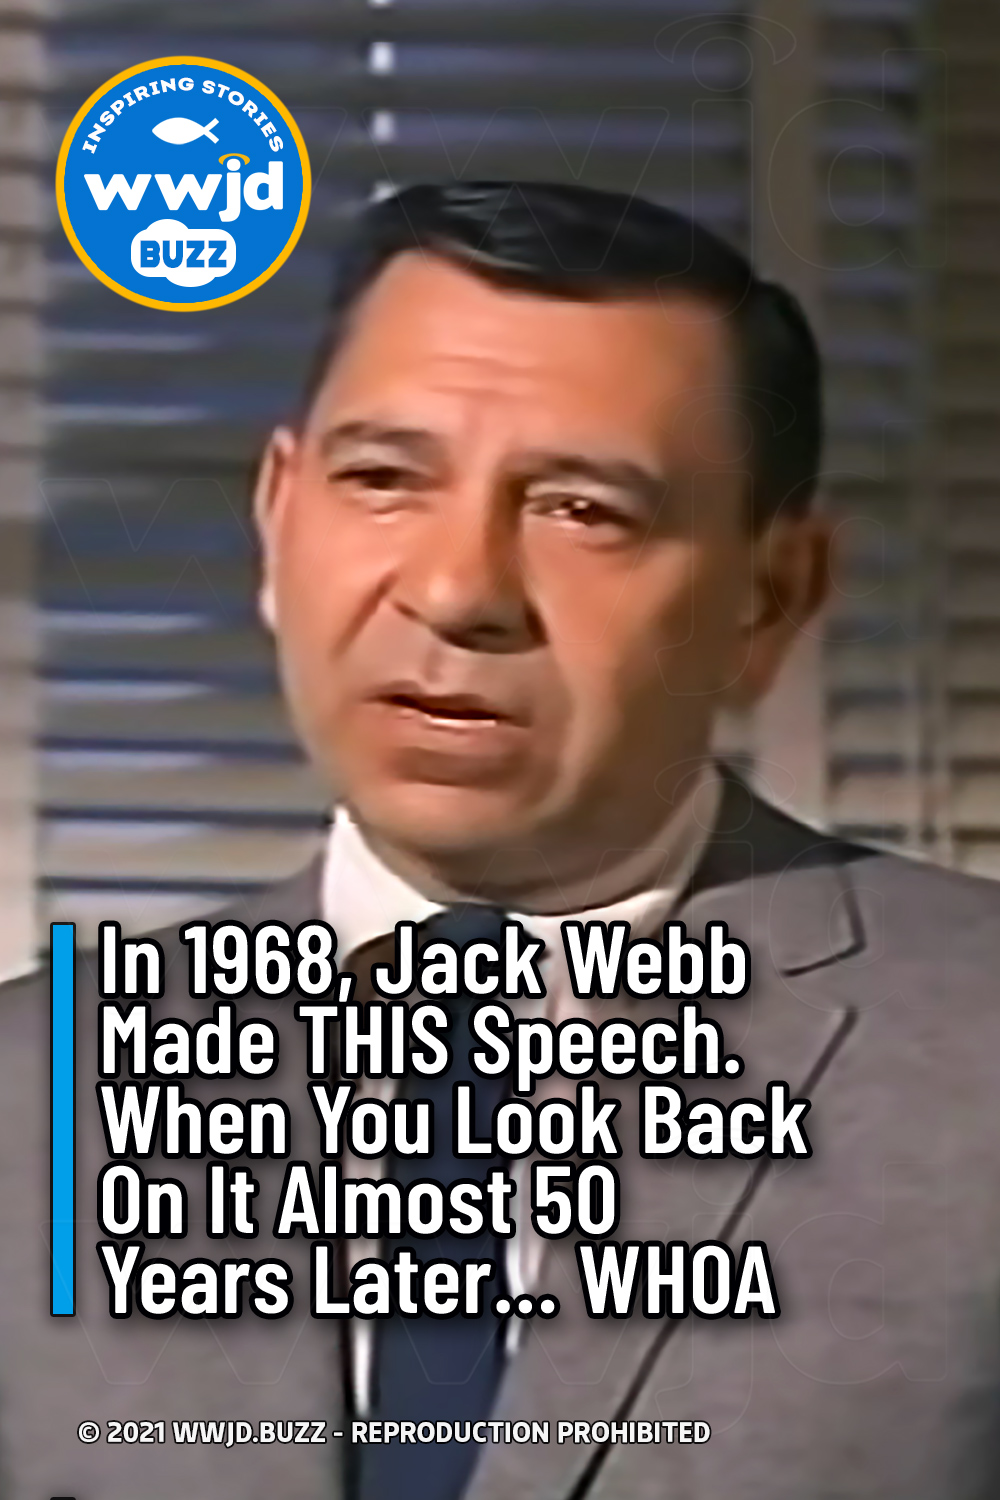 In 1968, Jack Webb Made THIS Speech. When You Look Back On It Almost 50 Years Later... WHOA